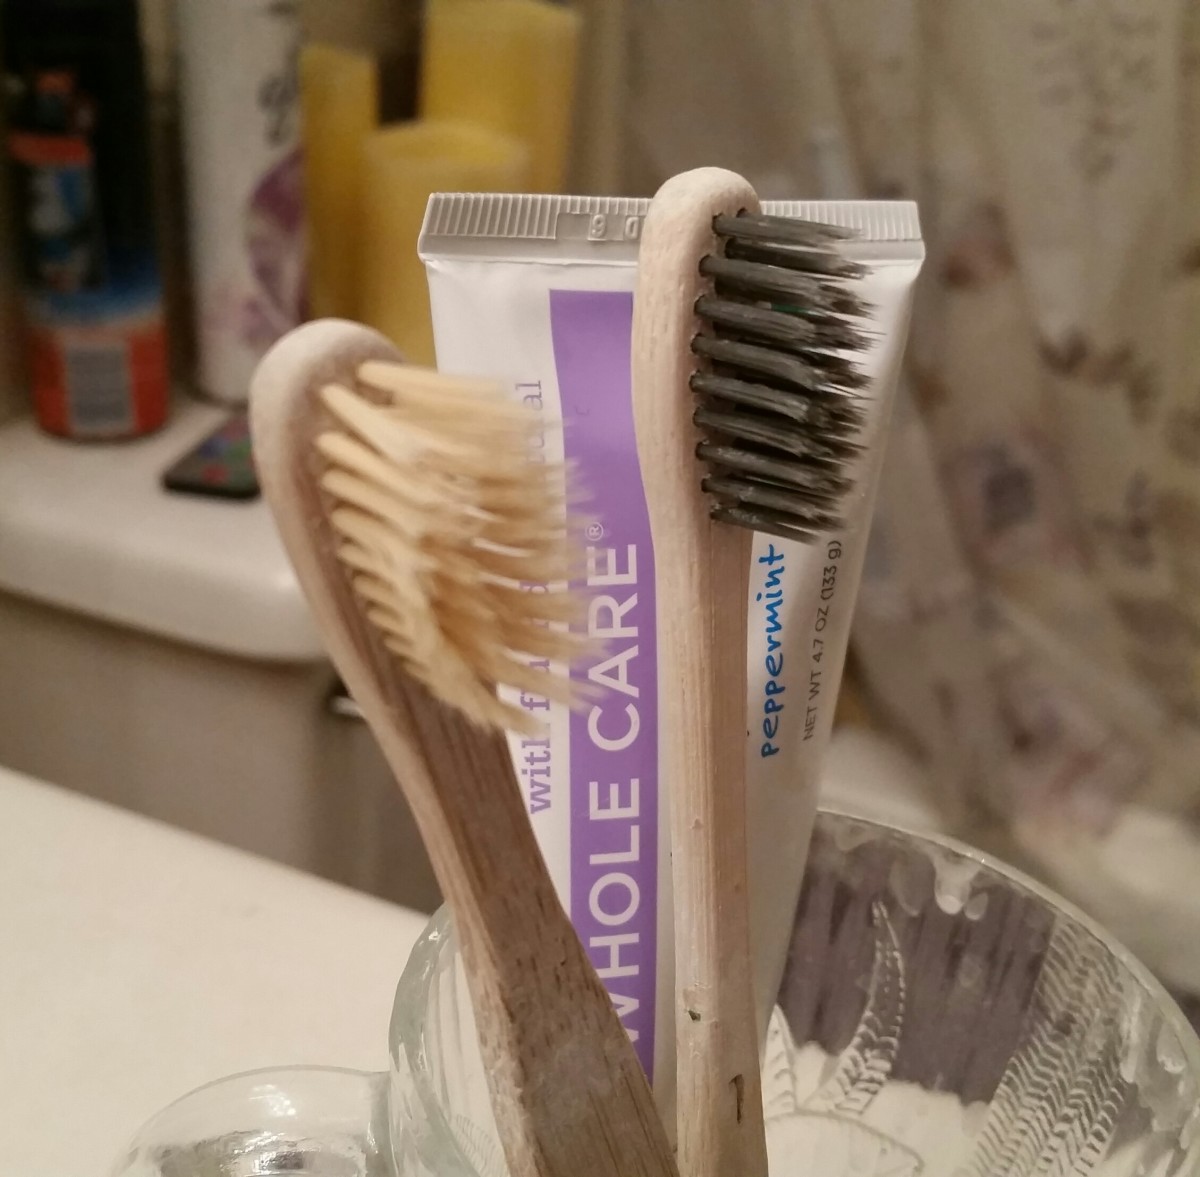 Using bamboo toothbrushes instead of plastic ones is a great idea. 